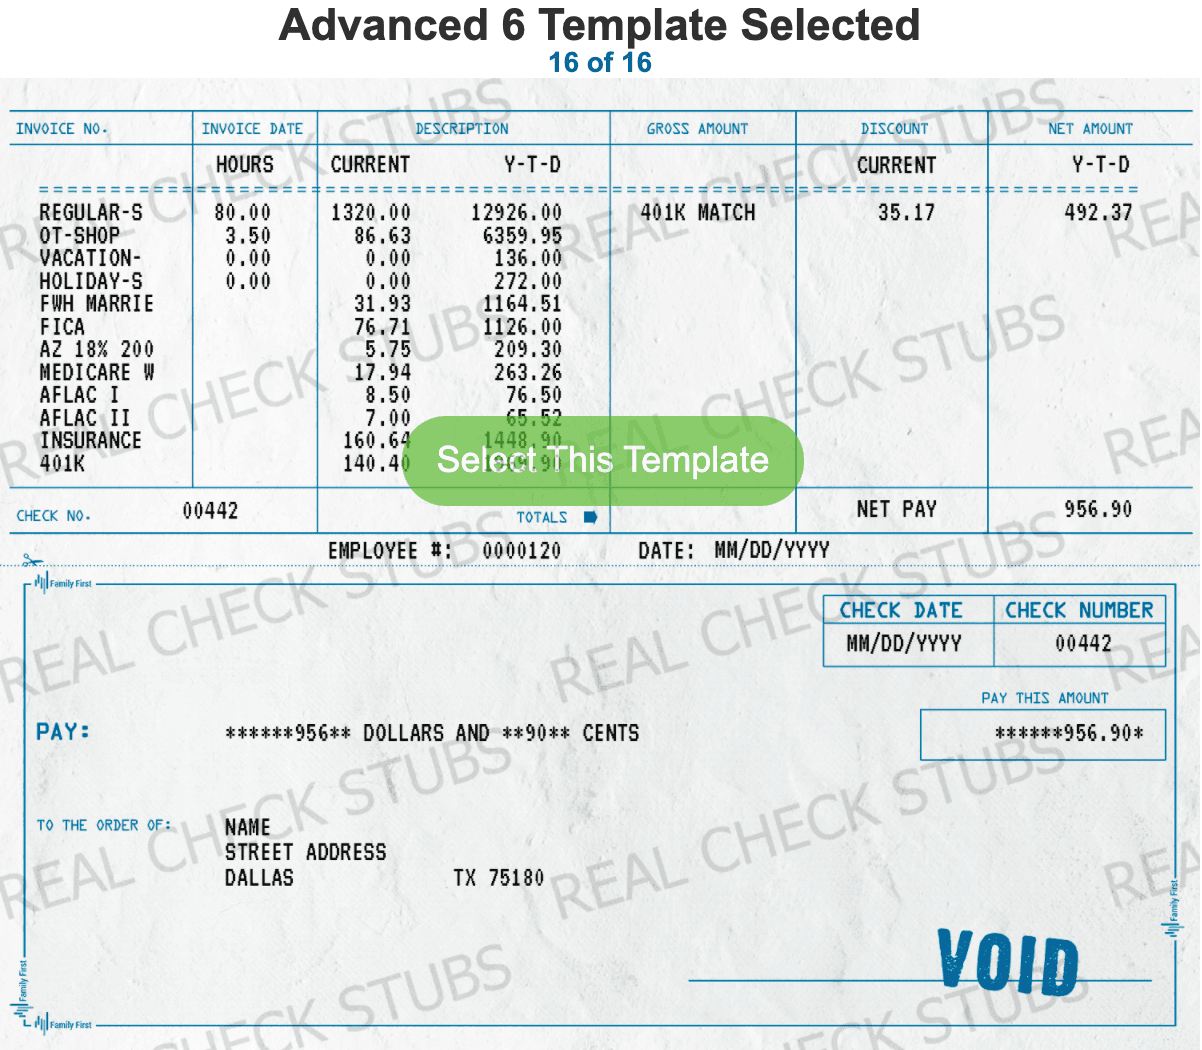 Pay Stub with Voided Check - What You Need To Know